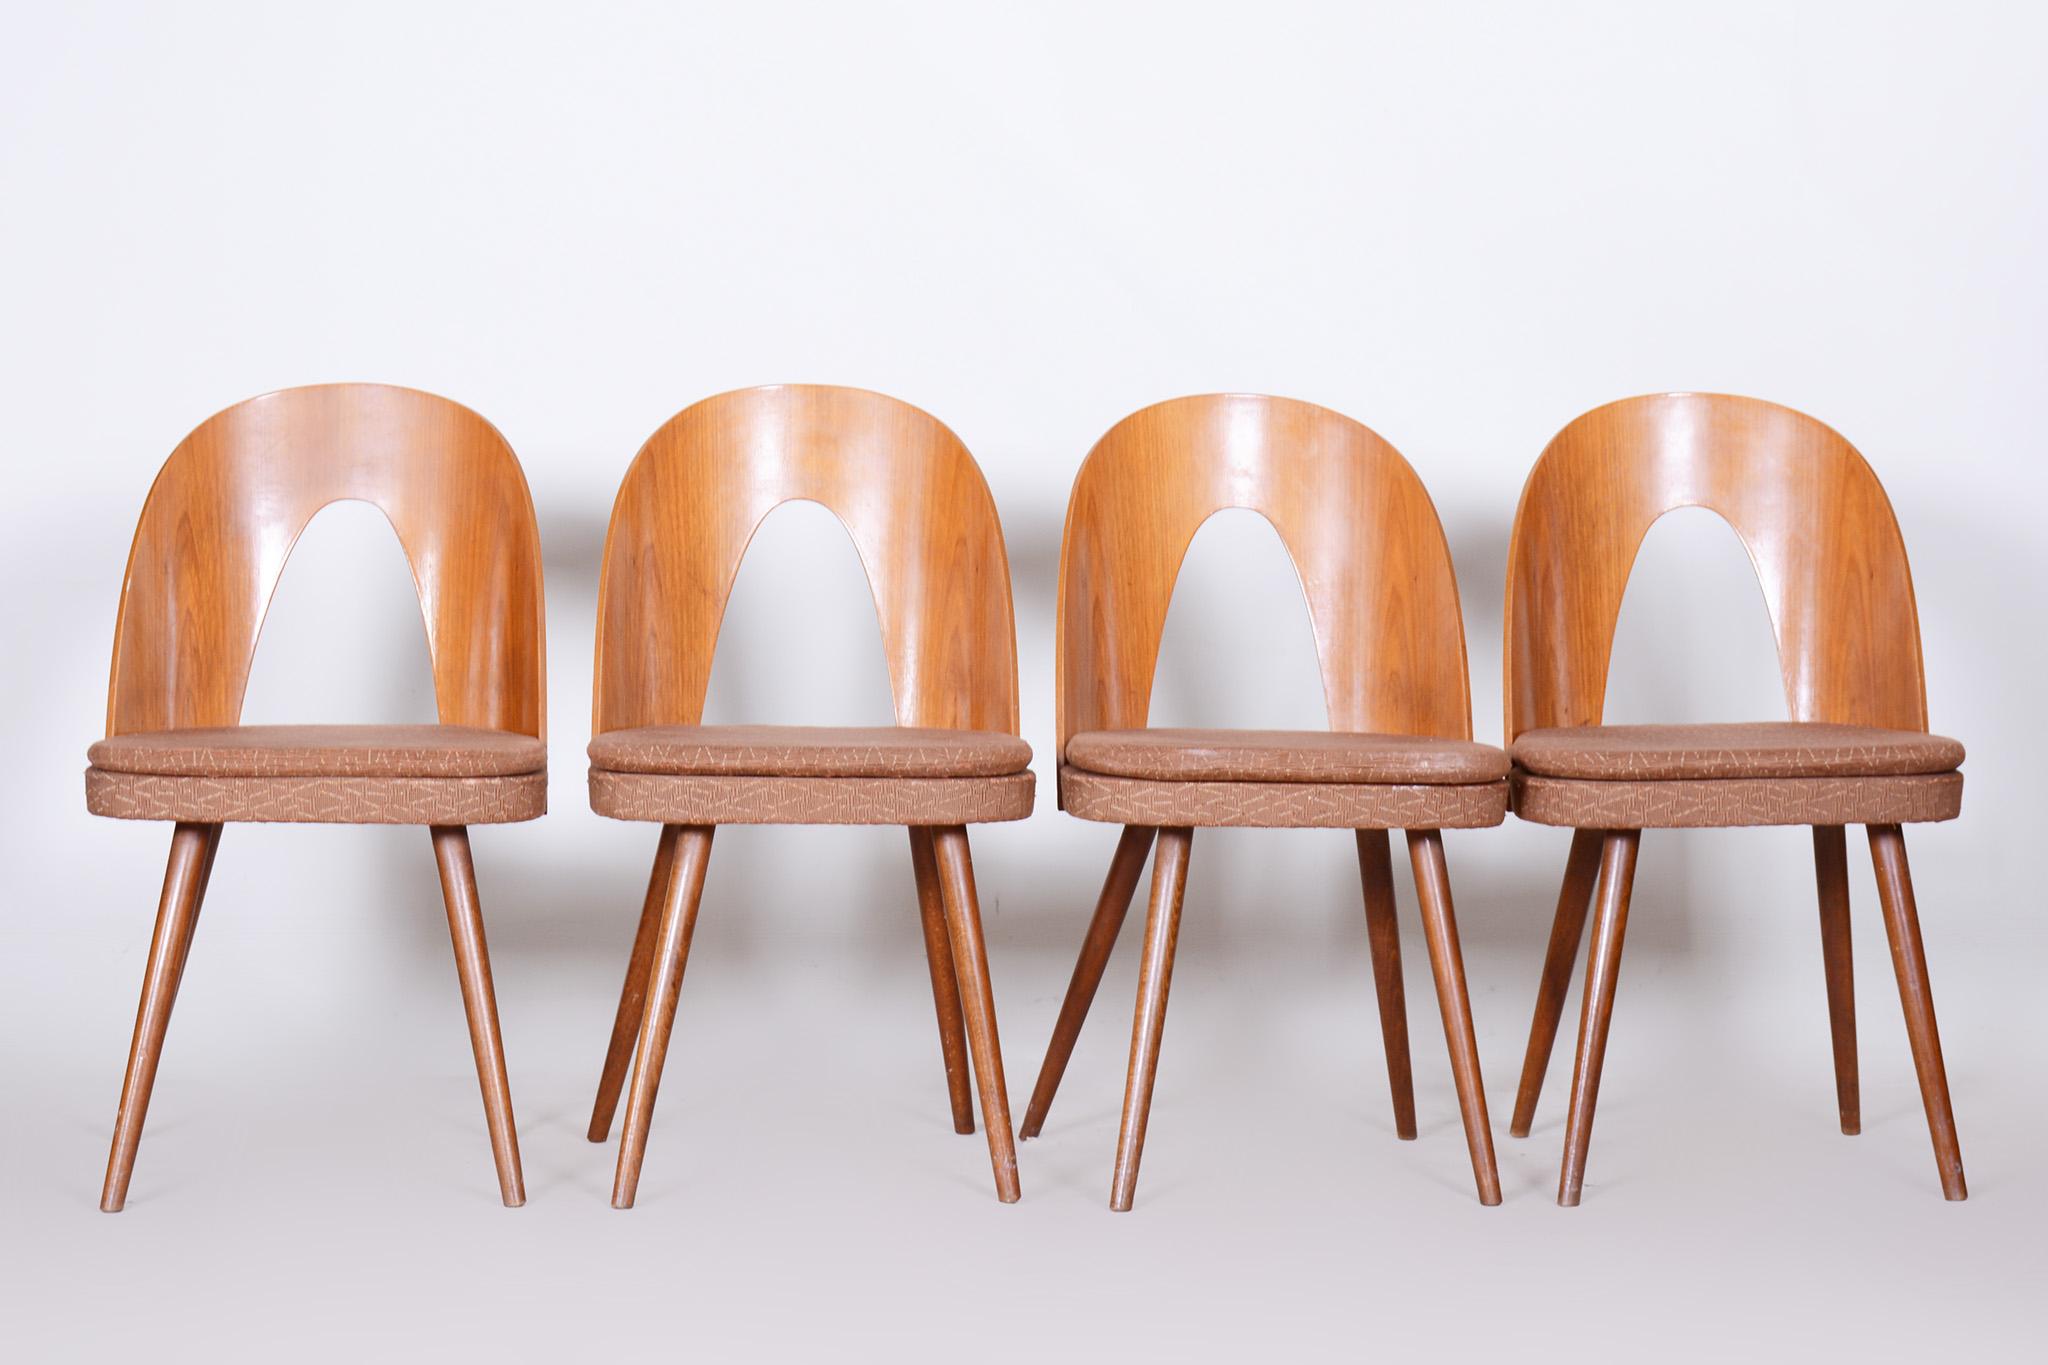 Set of four Mid-Century Modern chairs made in 1950s Czechia by Antonín Šuman

In pristine original condition, the upholstery has been professionally cleaned and its polish revived by our refurbushing team in Czechia. Made out of Walnut and